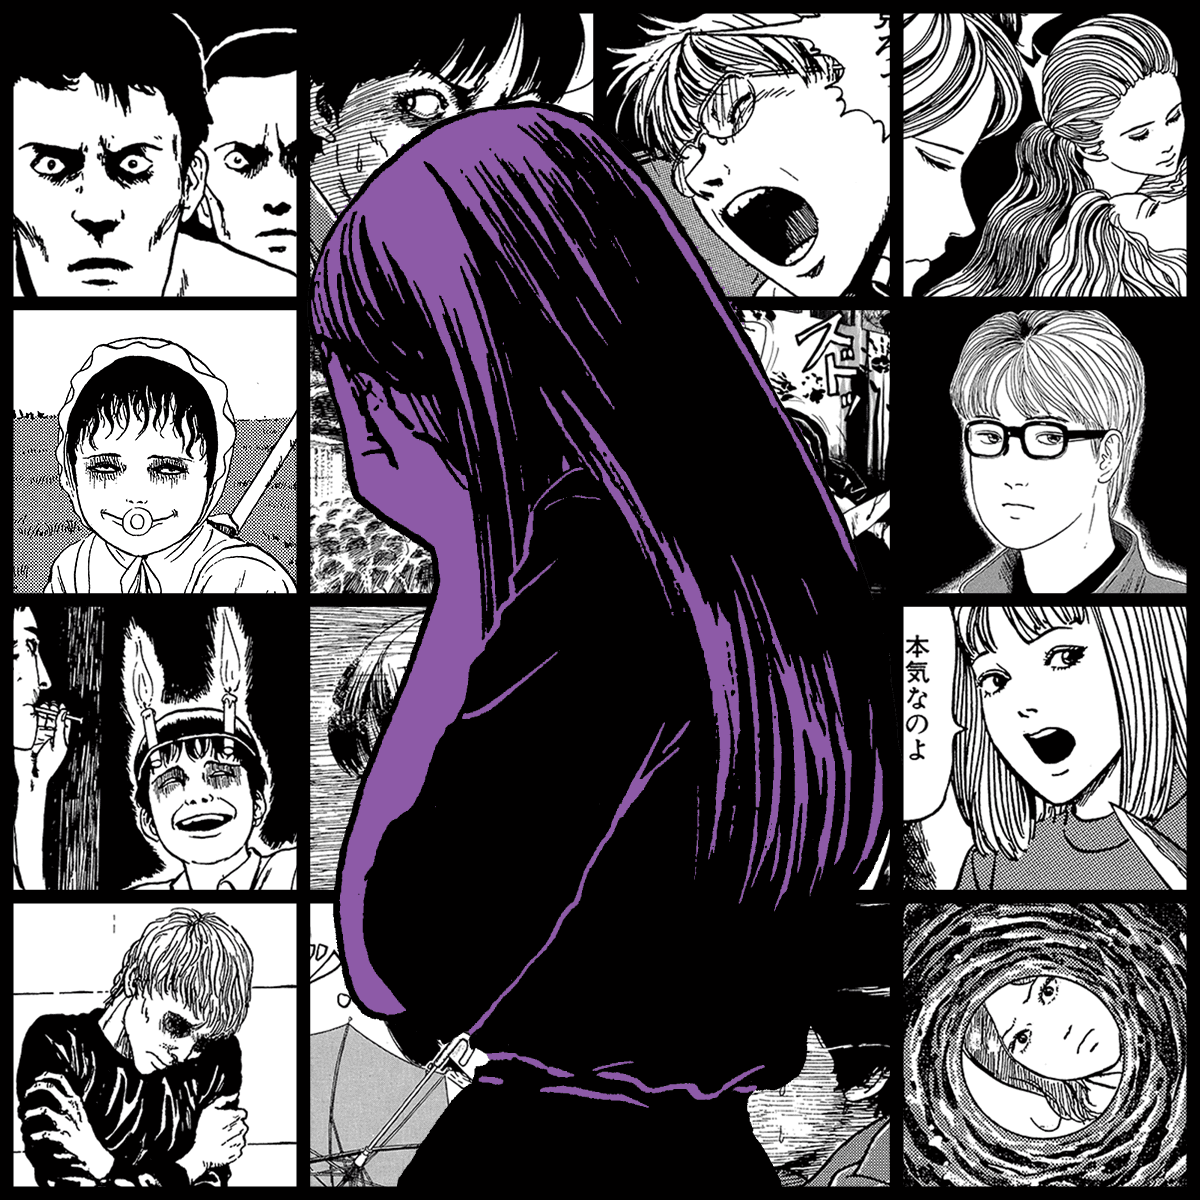 TOMIE by Junji Ito #1792